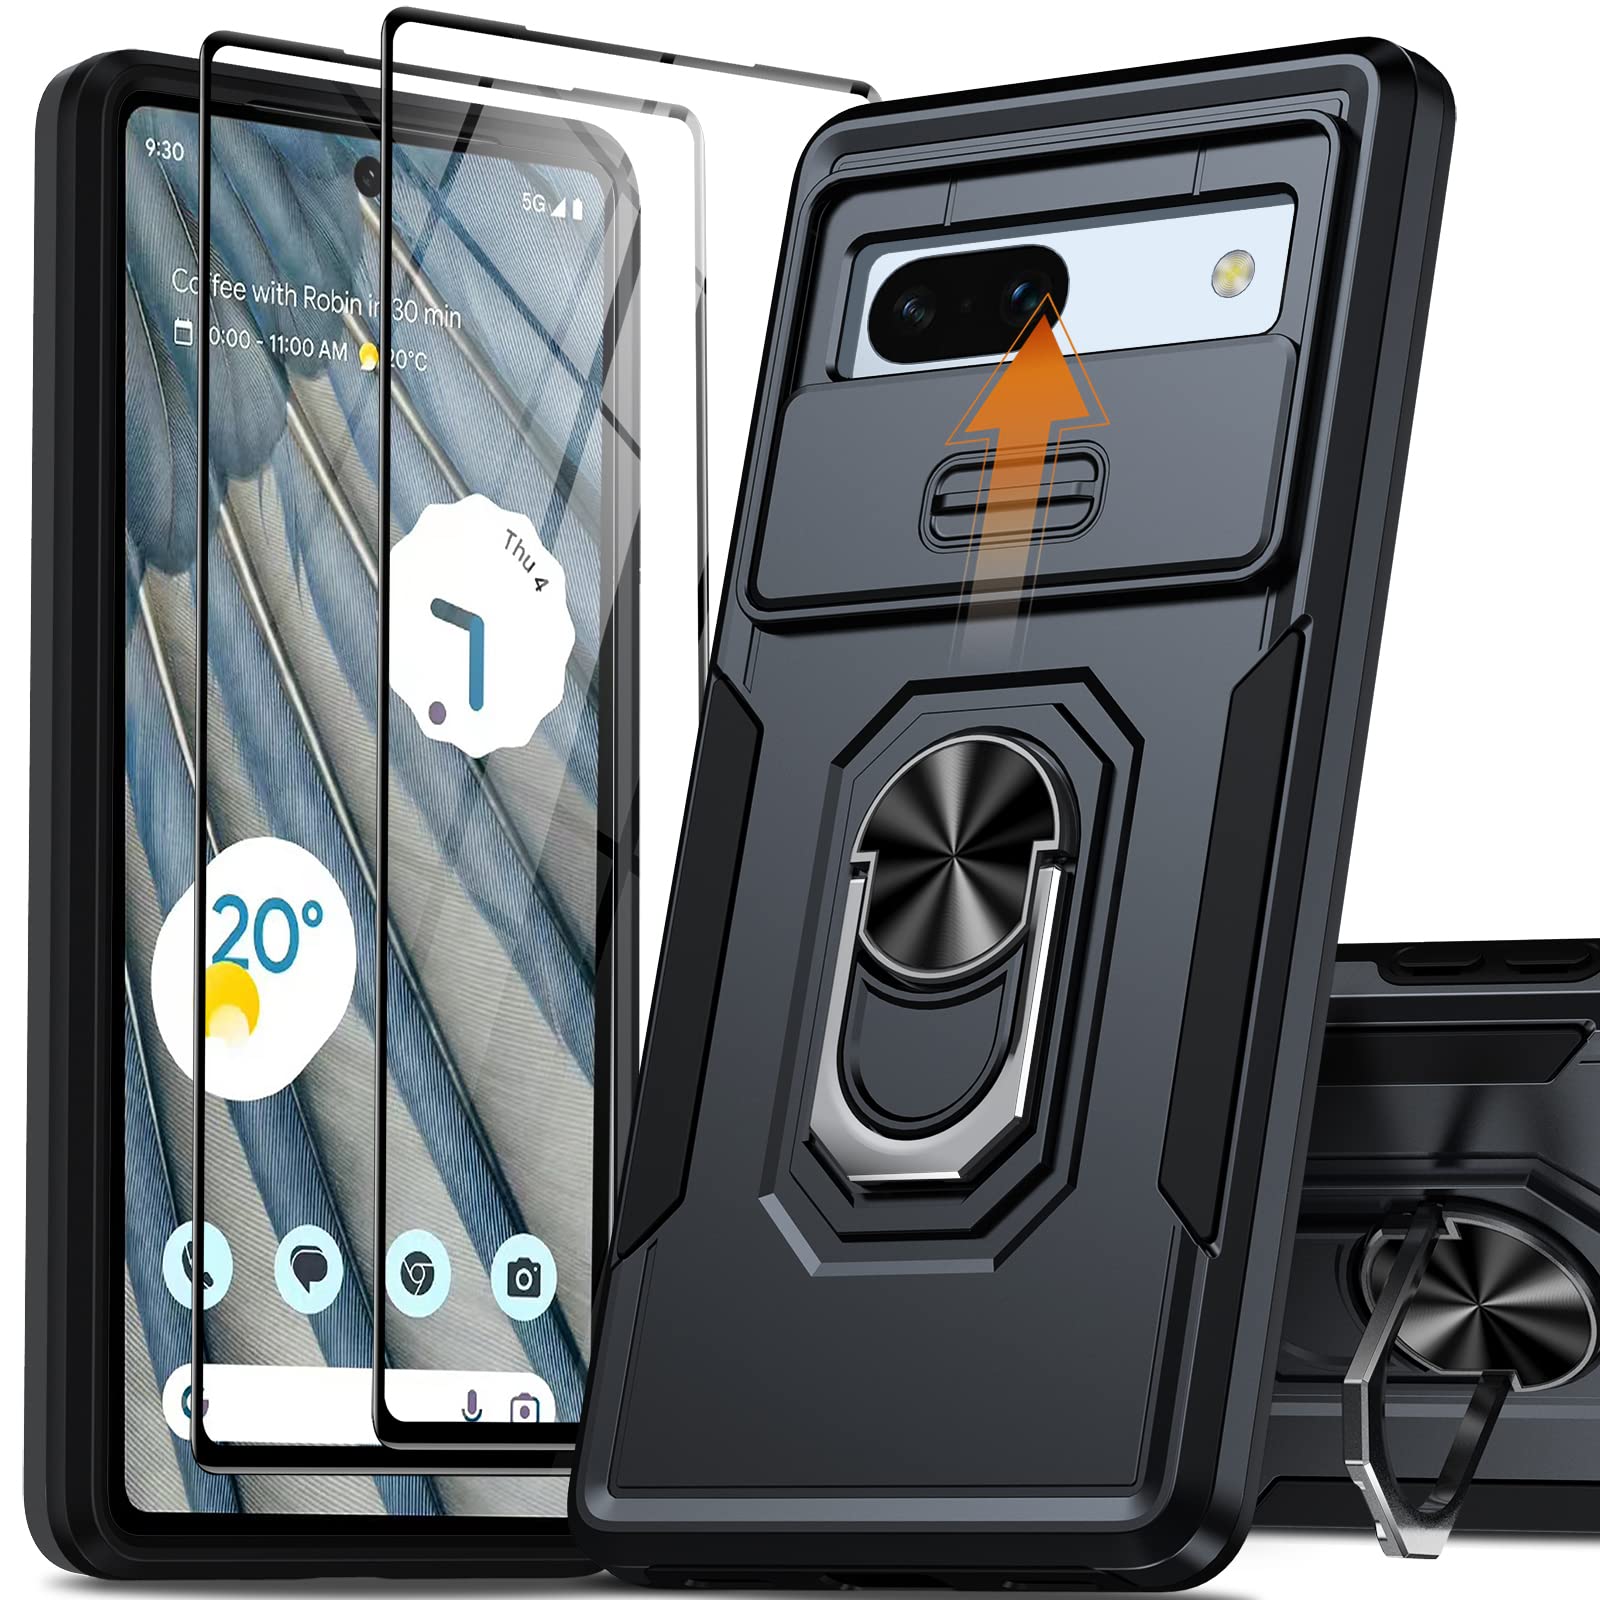 Oneagle for Google Pixel 7a Case with Screen Protector(2Pcs), Pixel 7a Phone Case with [Slide Camera Lens Cover]+[360° Rotatable Metal Kickstand] Military Grade Shockproof Case for Pixel 7A 6.1"